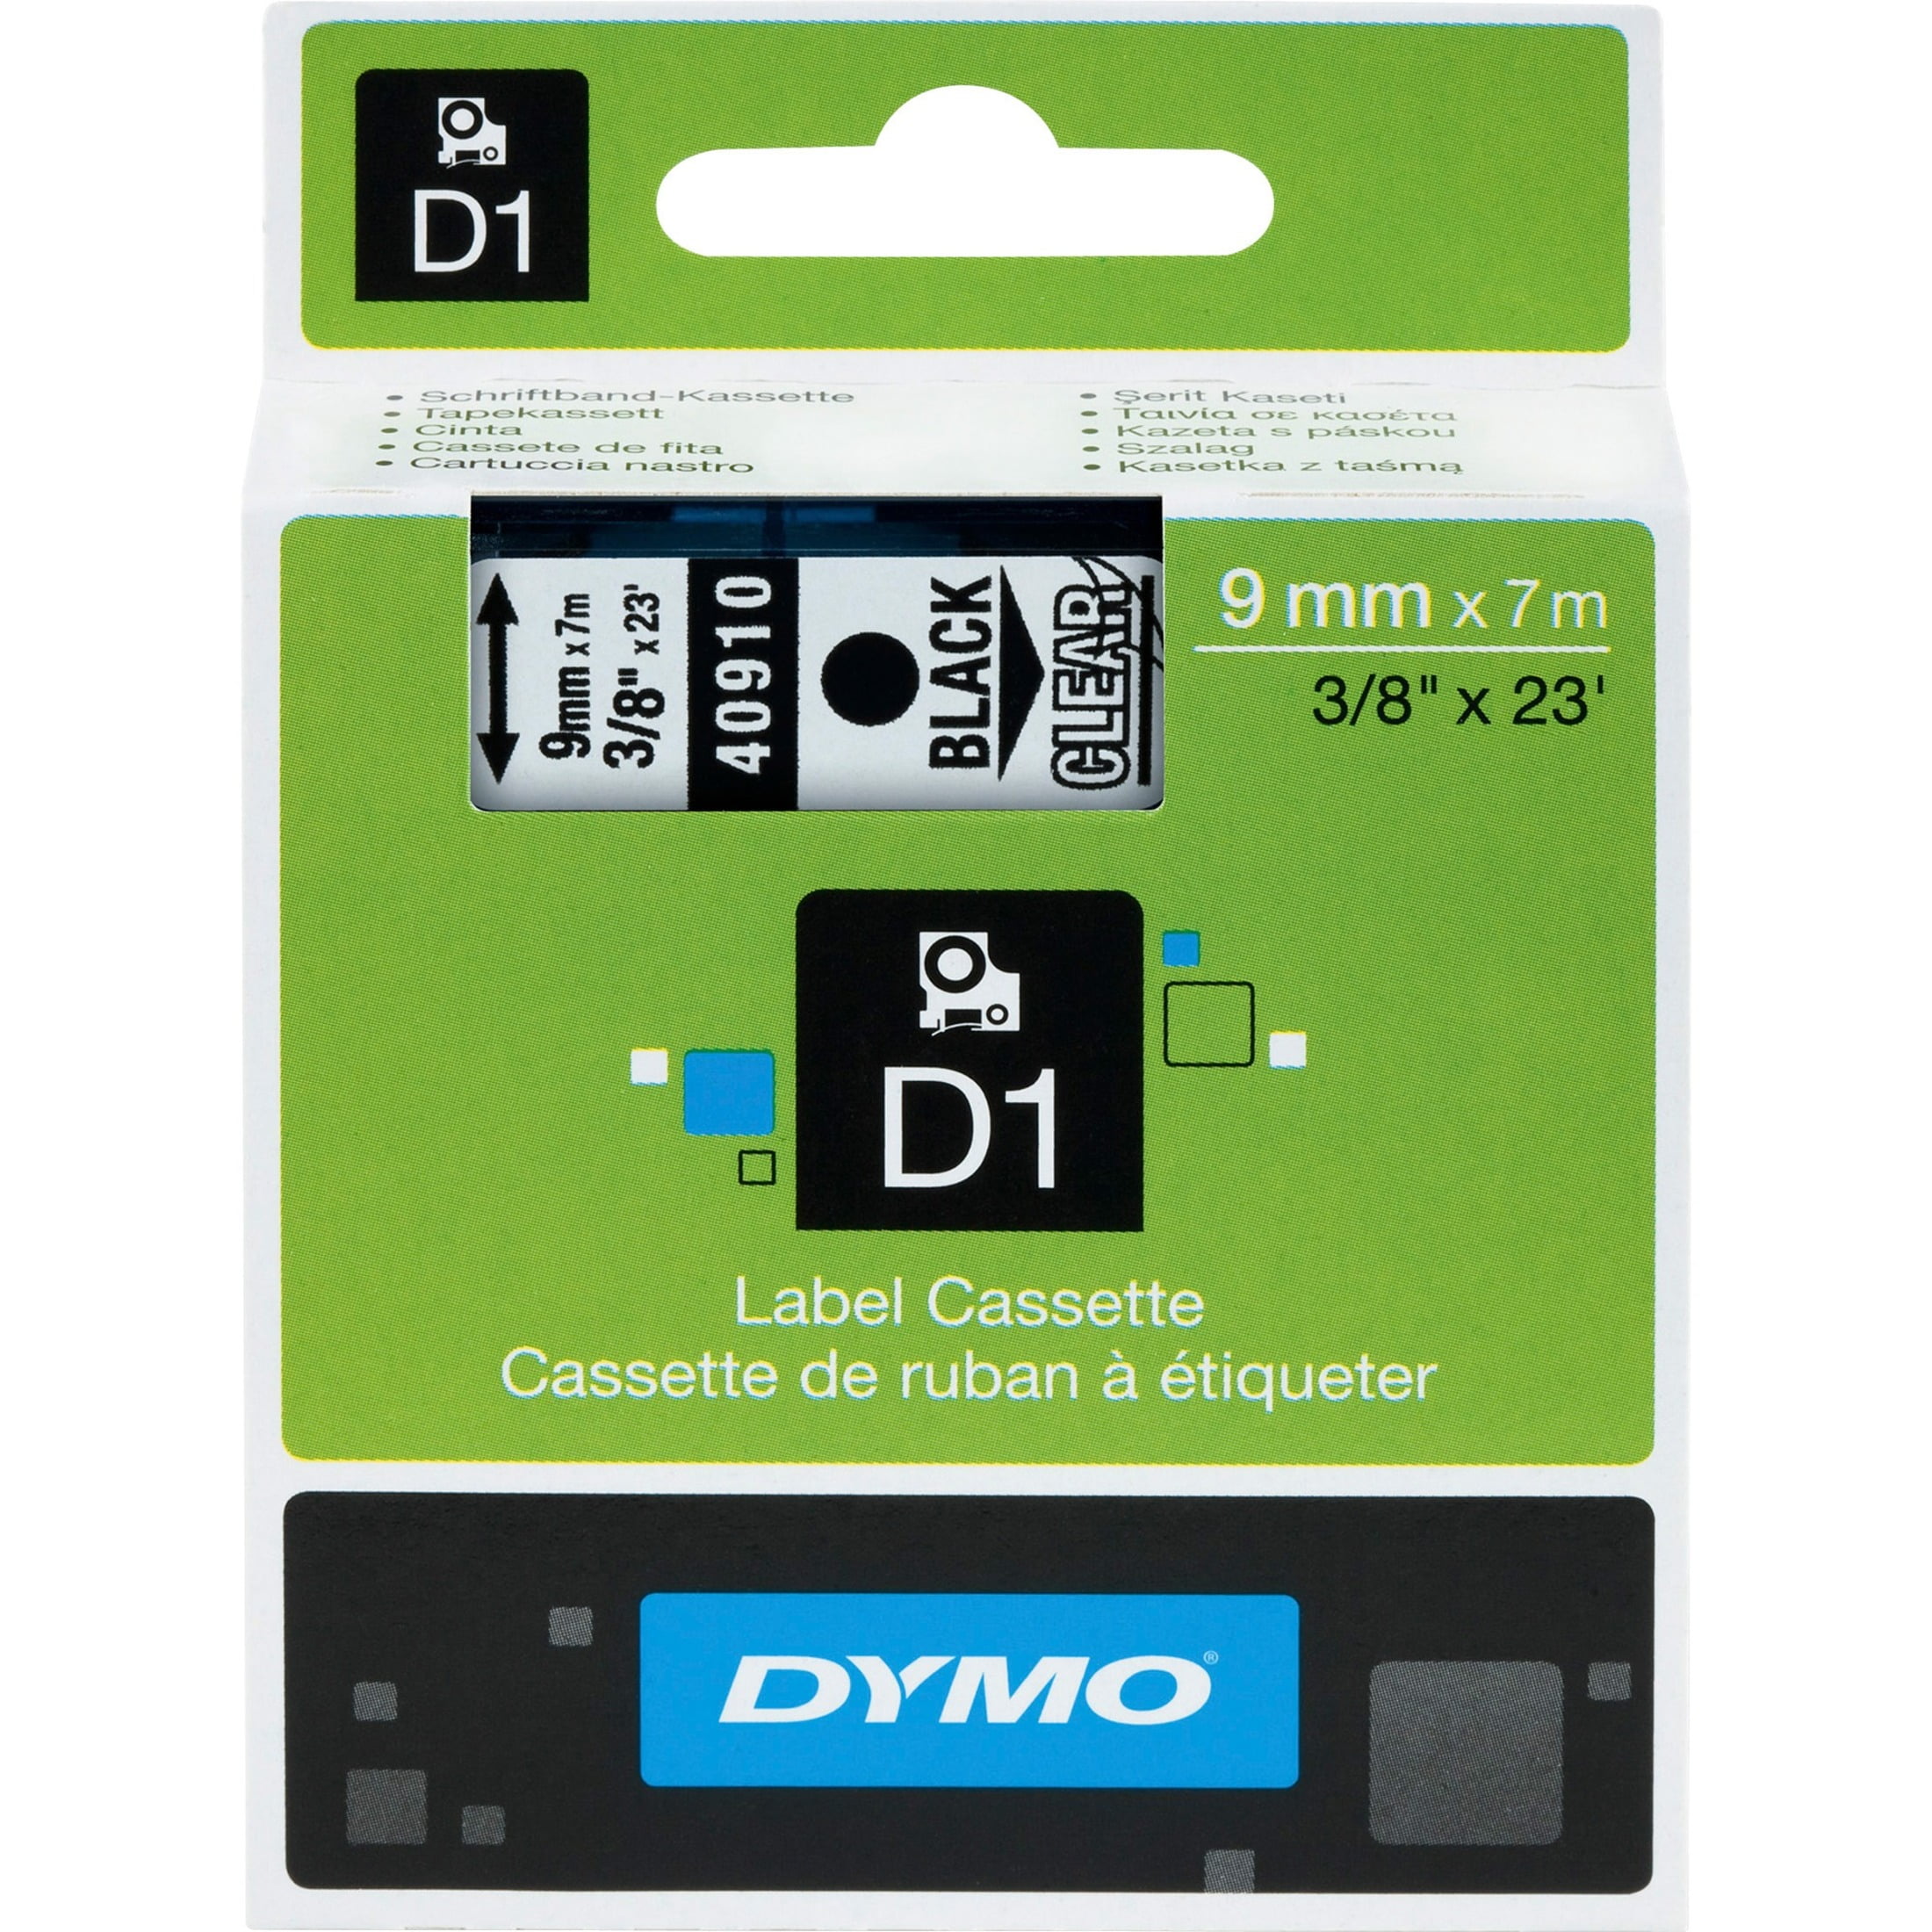 DYMO Permanent High-Performance D1 Self-Adhesive Polyester Tape Black print on White 16956 3/4-inch DYMO Authentic 18-foot cartridge 